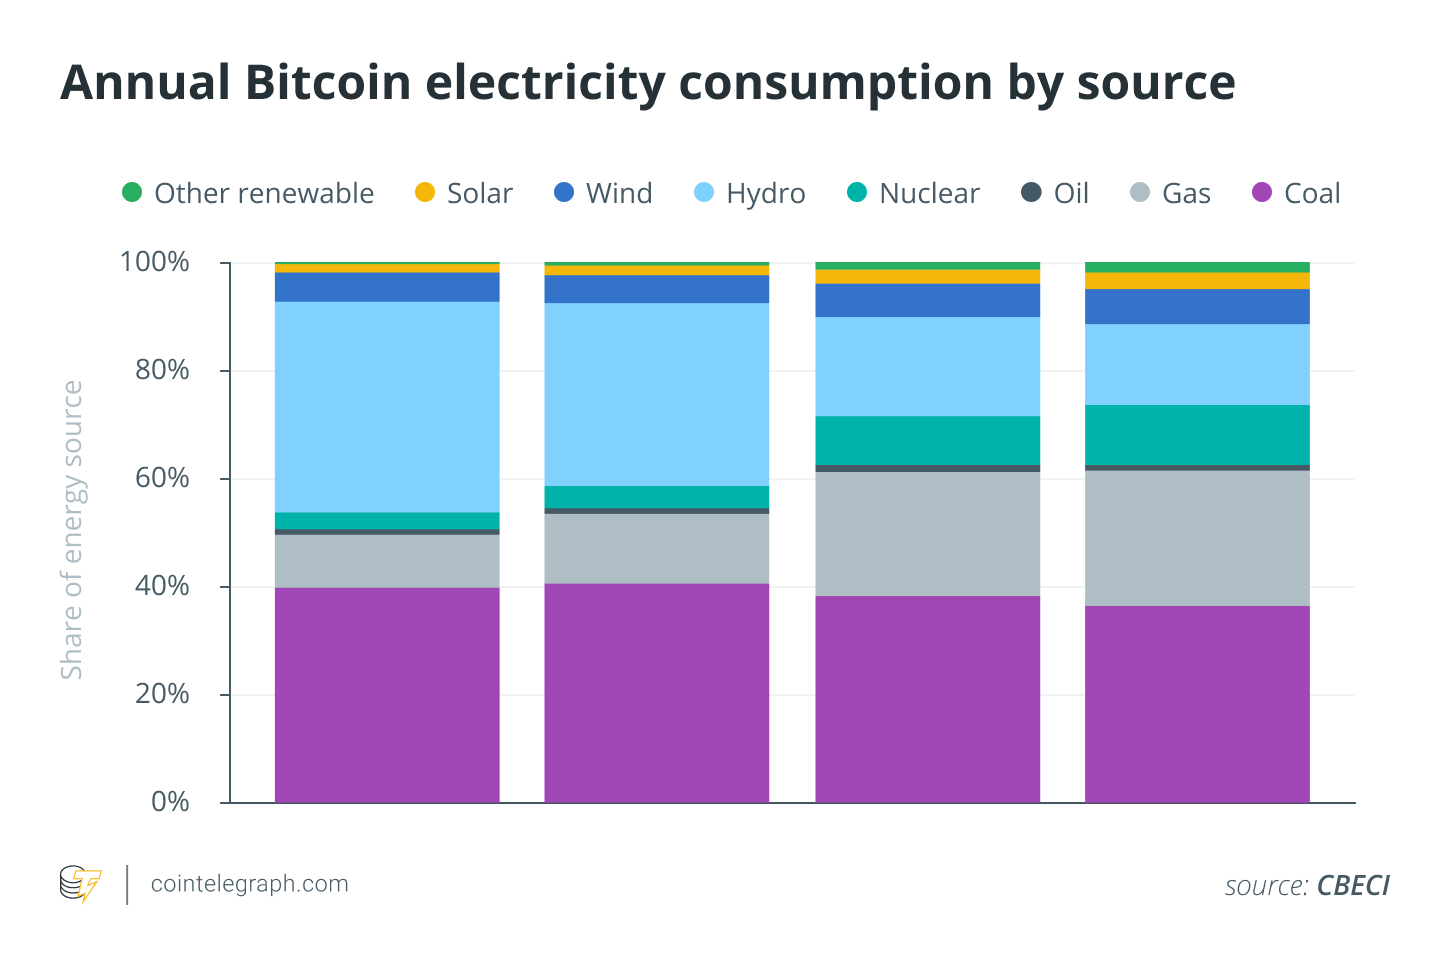 Will Tesla Accept Bitcoin Again with More Renewable Energy Use?